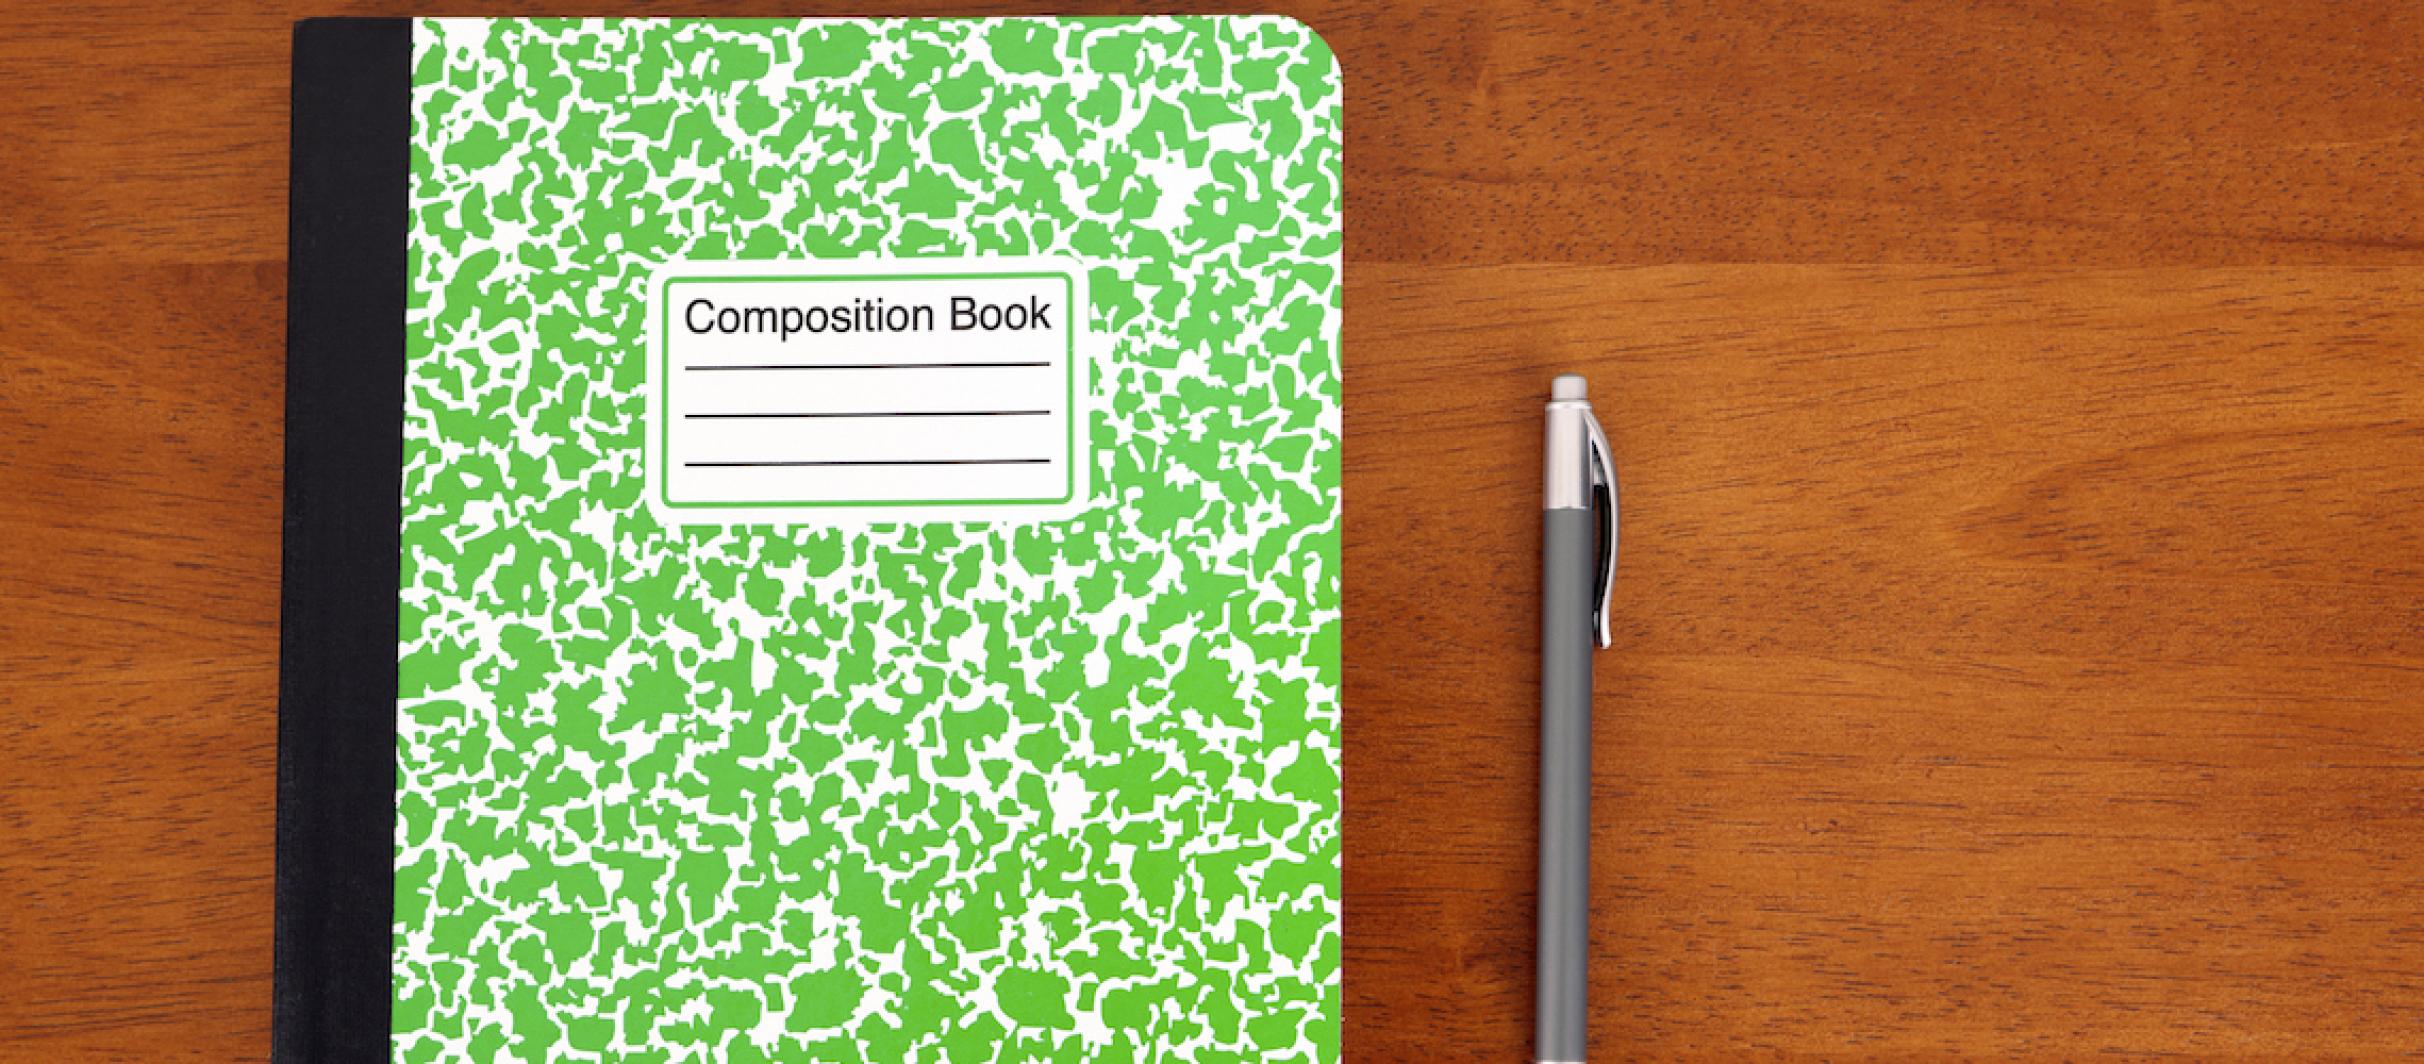 Composition notebook